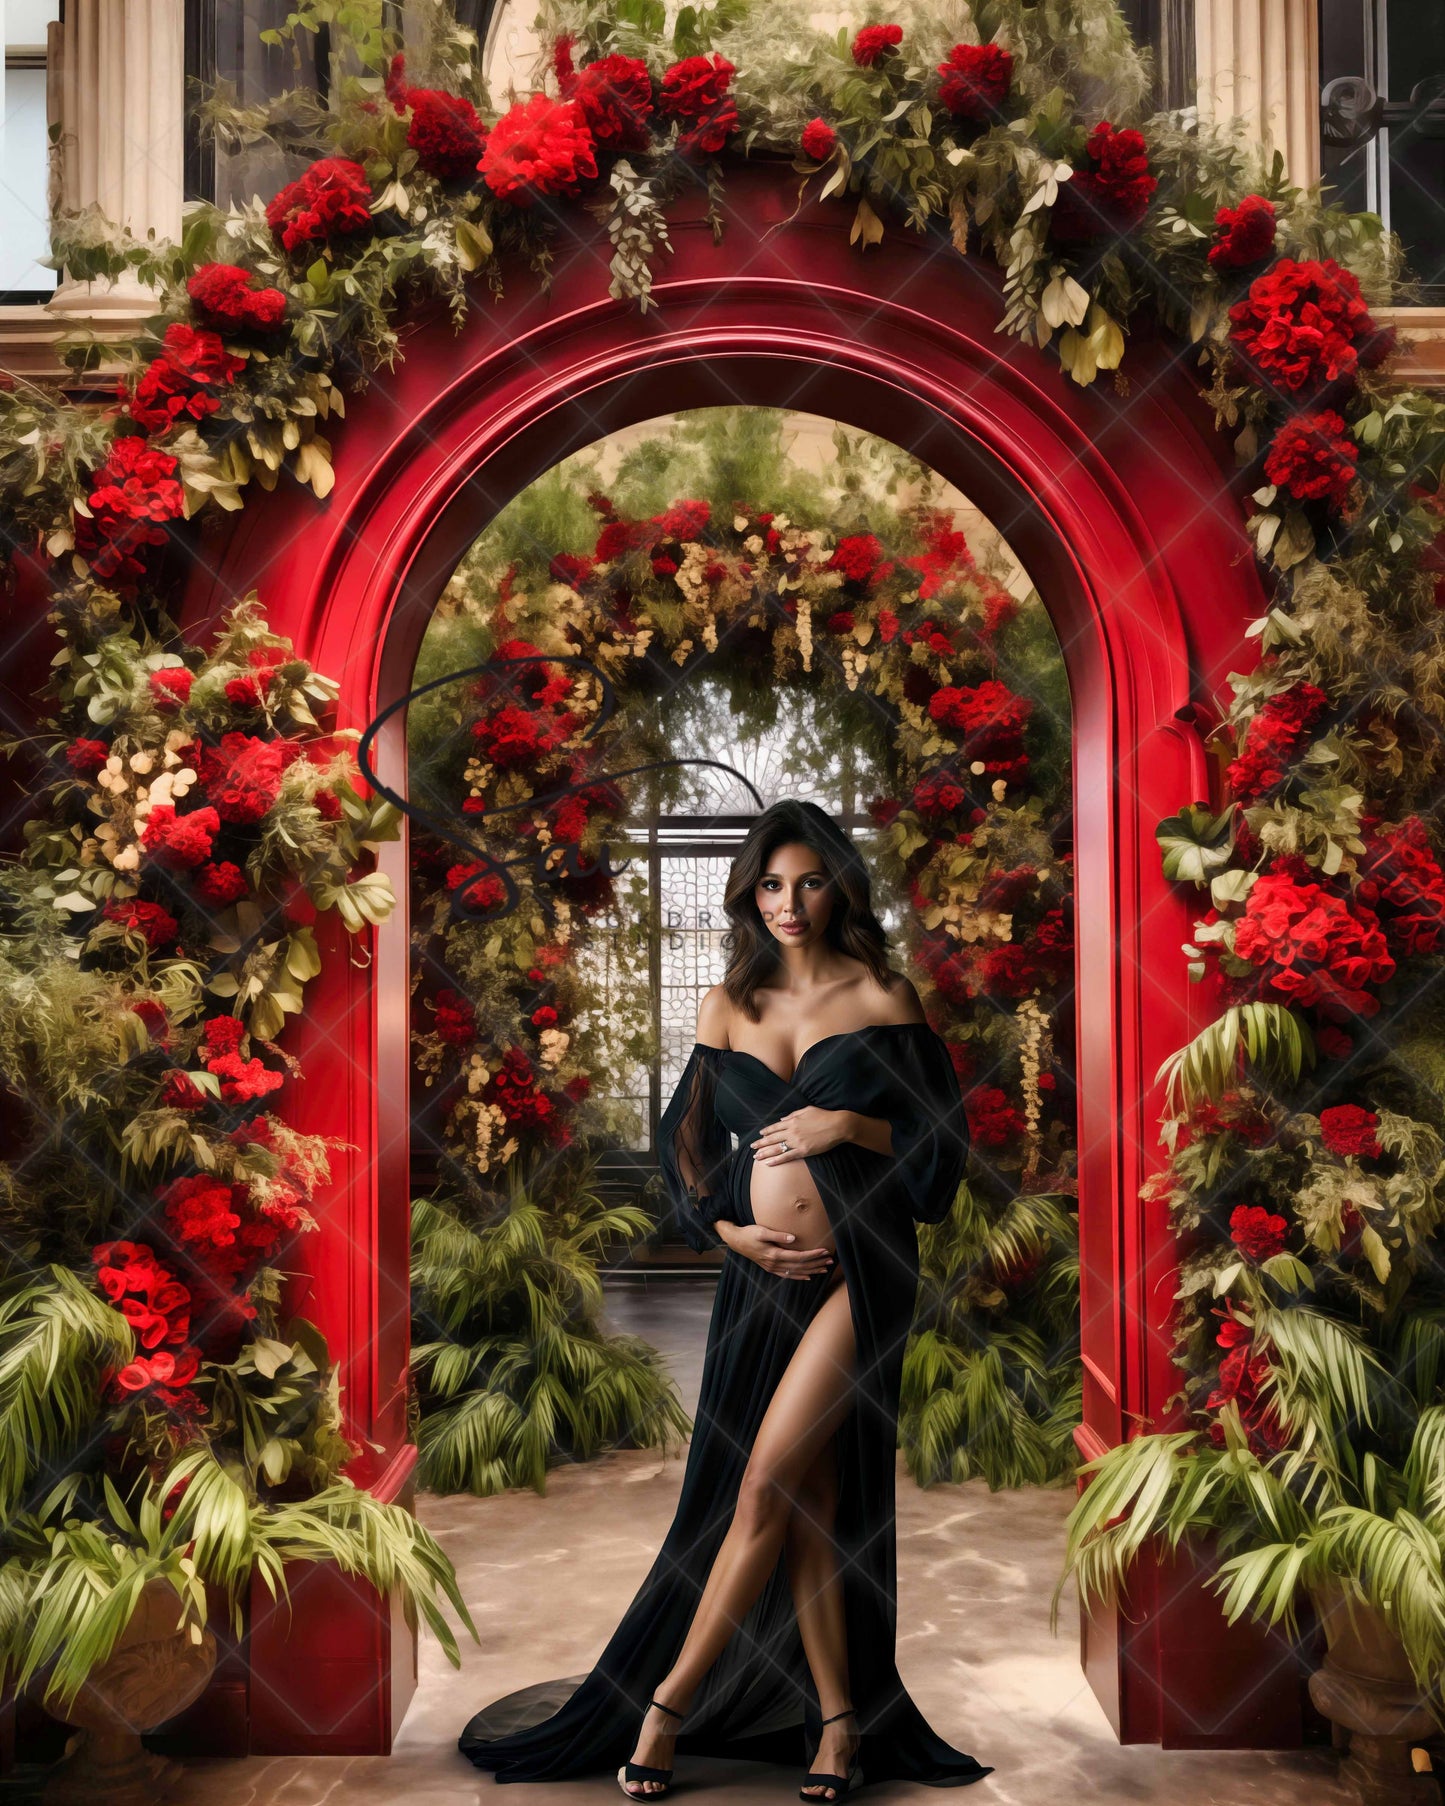 Majestic Red Gateway - Digital Backdrop - With Personal and Commercial License for Businesses